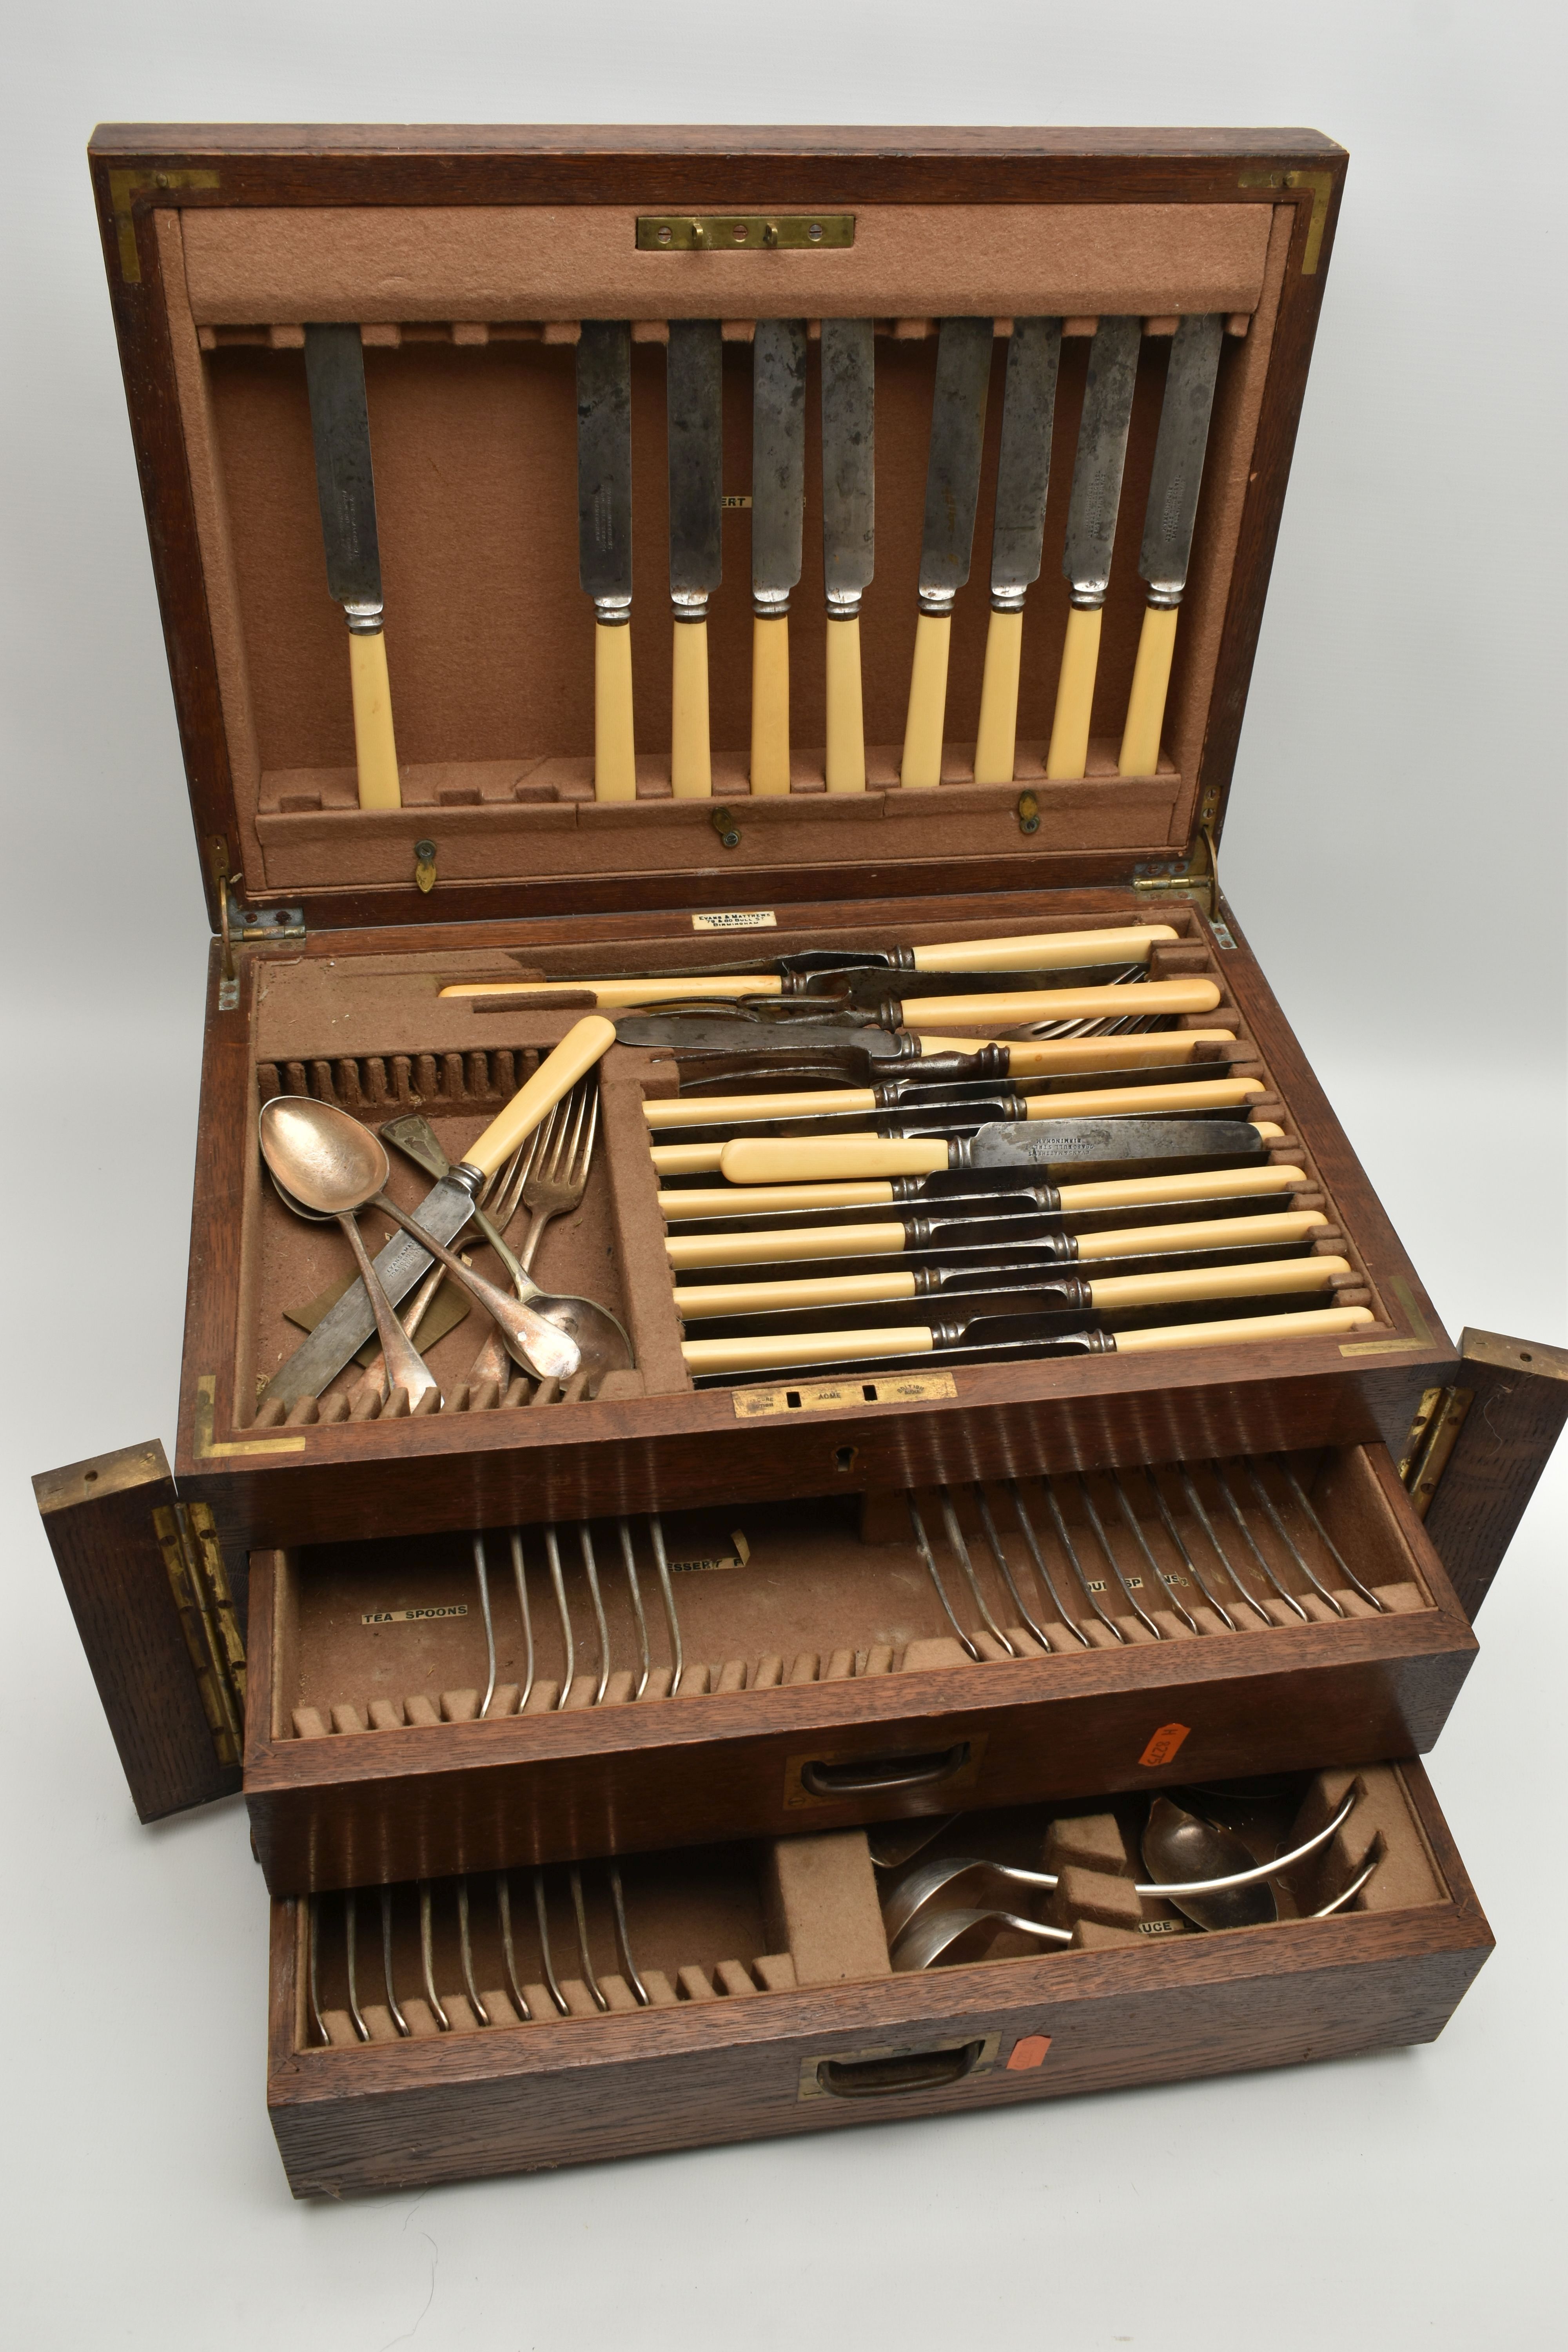 A LARGE WOODEN CANTEEN, box signed 'Evans & Matthews', incomplete ivorine handled cutlery set